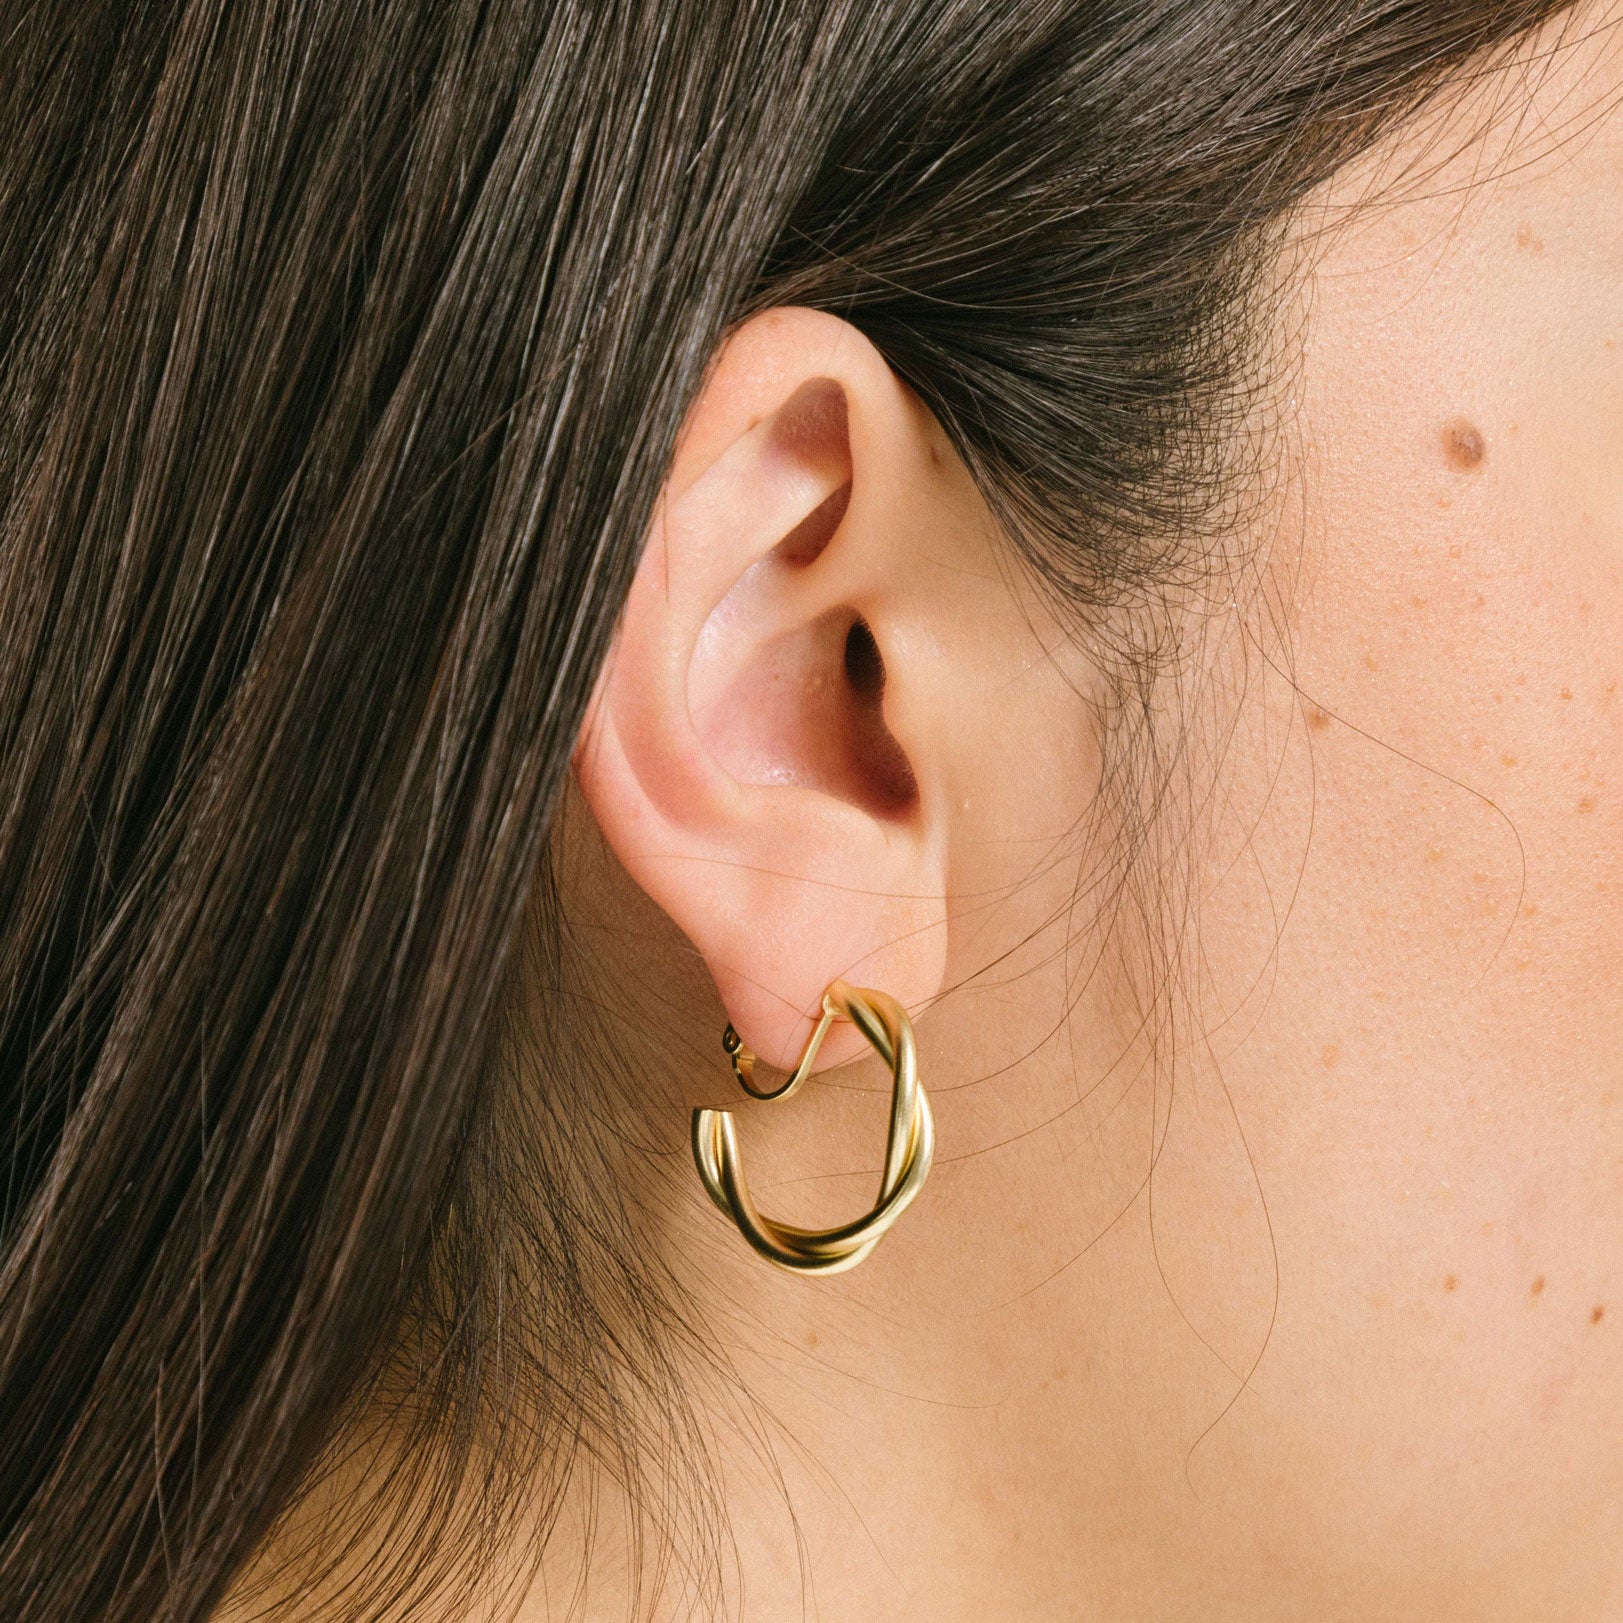 A model wearing the Twist Hoop Earrings feature a secure and comfortable screwback clip-on closure ideal for all ear types. Wear these earrings for up to 8-12 hours per day with a secure hold and the ability to be manually adjusted to the individual's size. Crafted from gold tone plated copper alloy, these earrings come is a single pair.